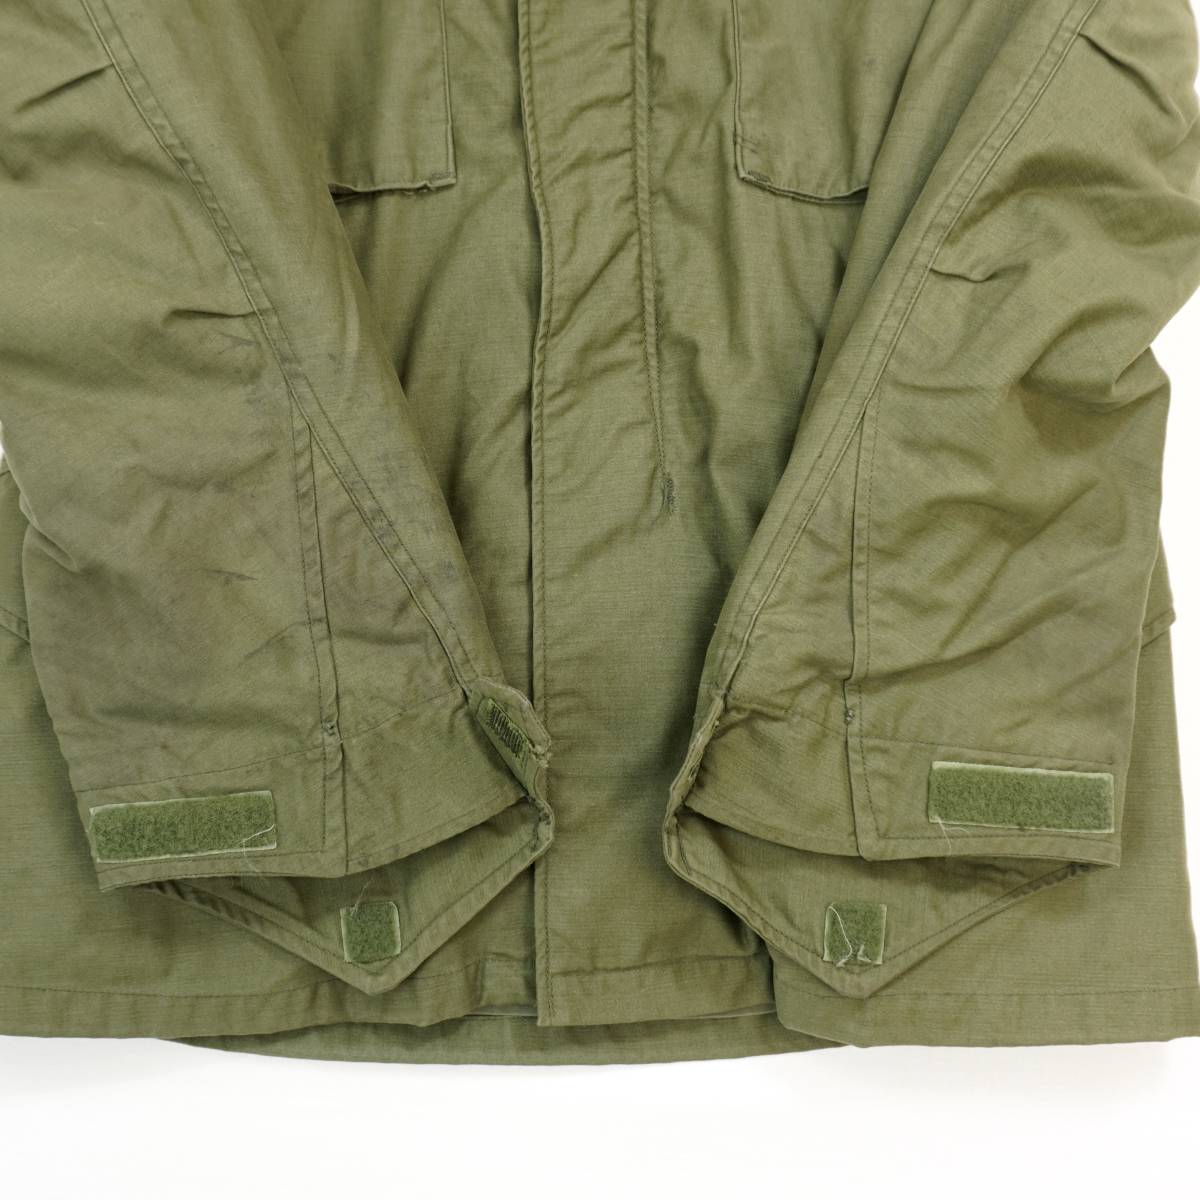 US ARMY M-65 FIELD JACKET with LINER 304221 Vintage 1960s アメリカ軍 フィールドジャケット ライナー付き 1960年代 ヴィンテージ